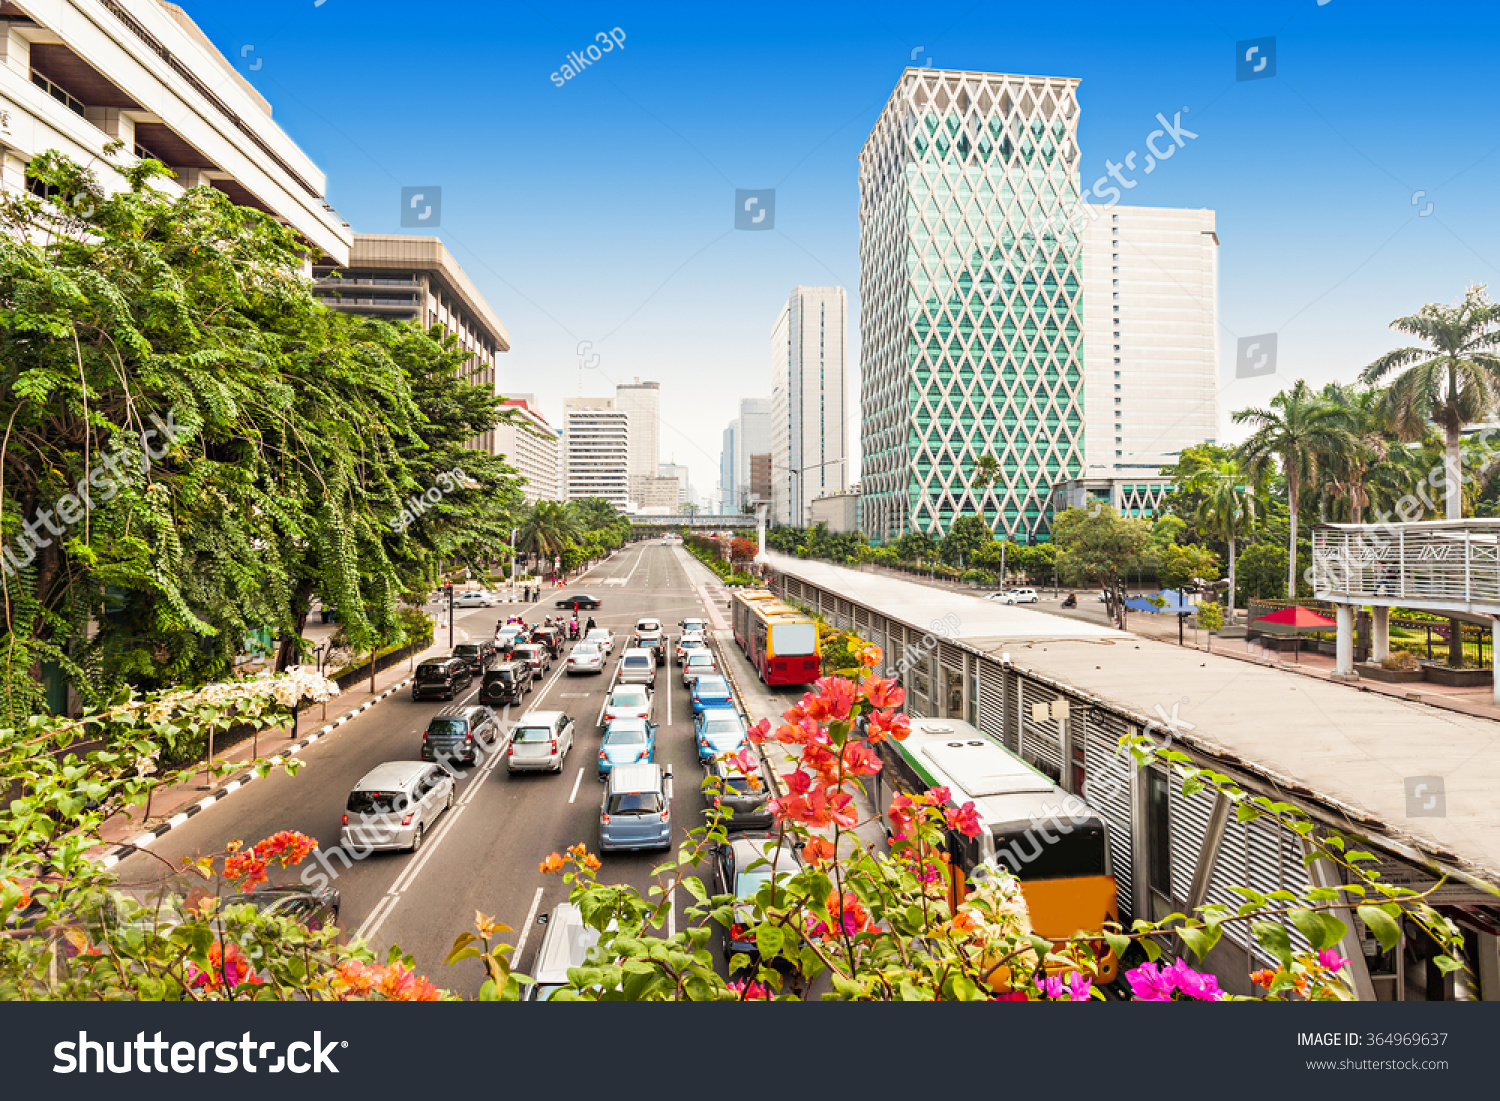 Jakarta City Center Aerial View In Indonesia Stock Photo 364969637